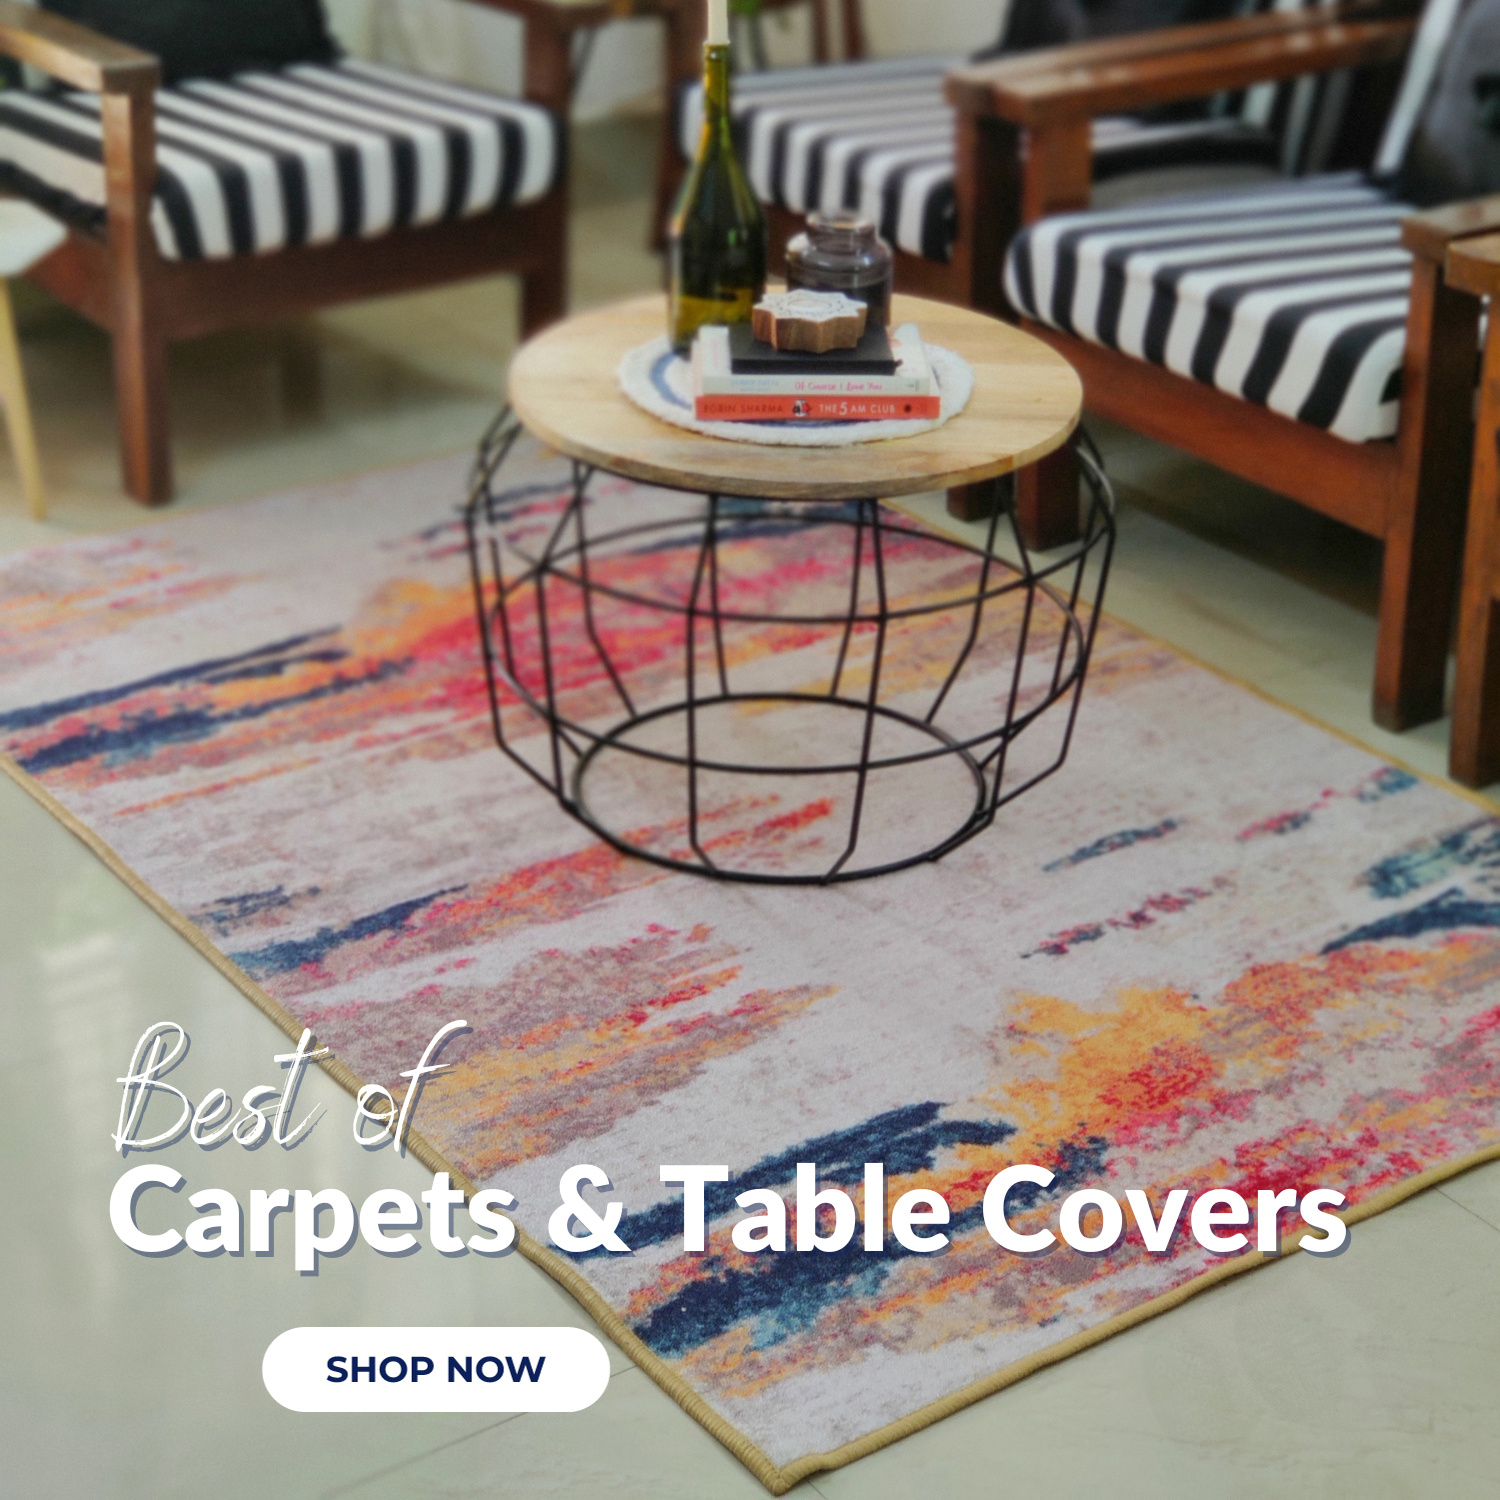 Carpets and table covers